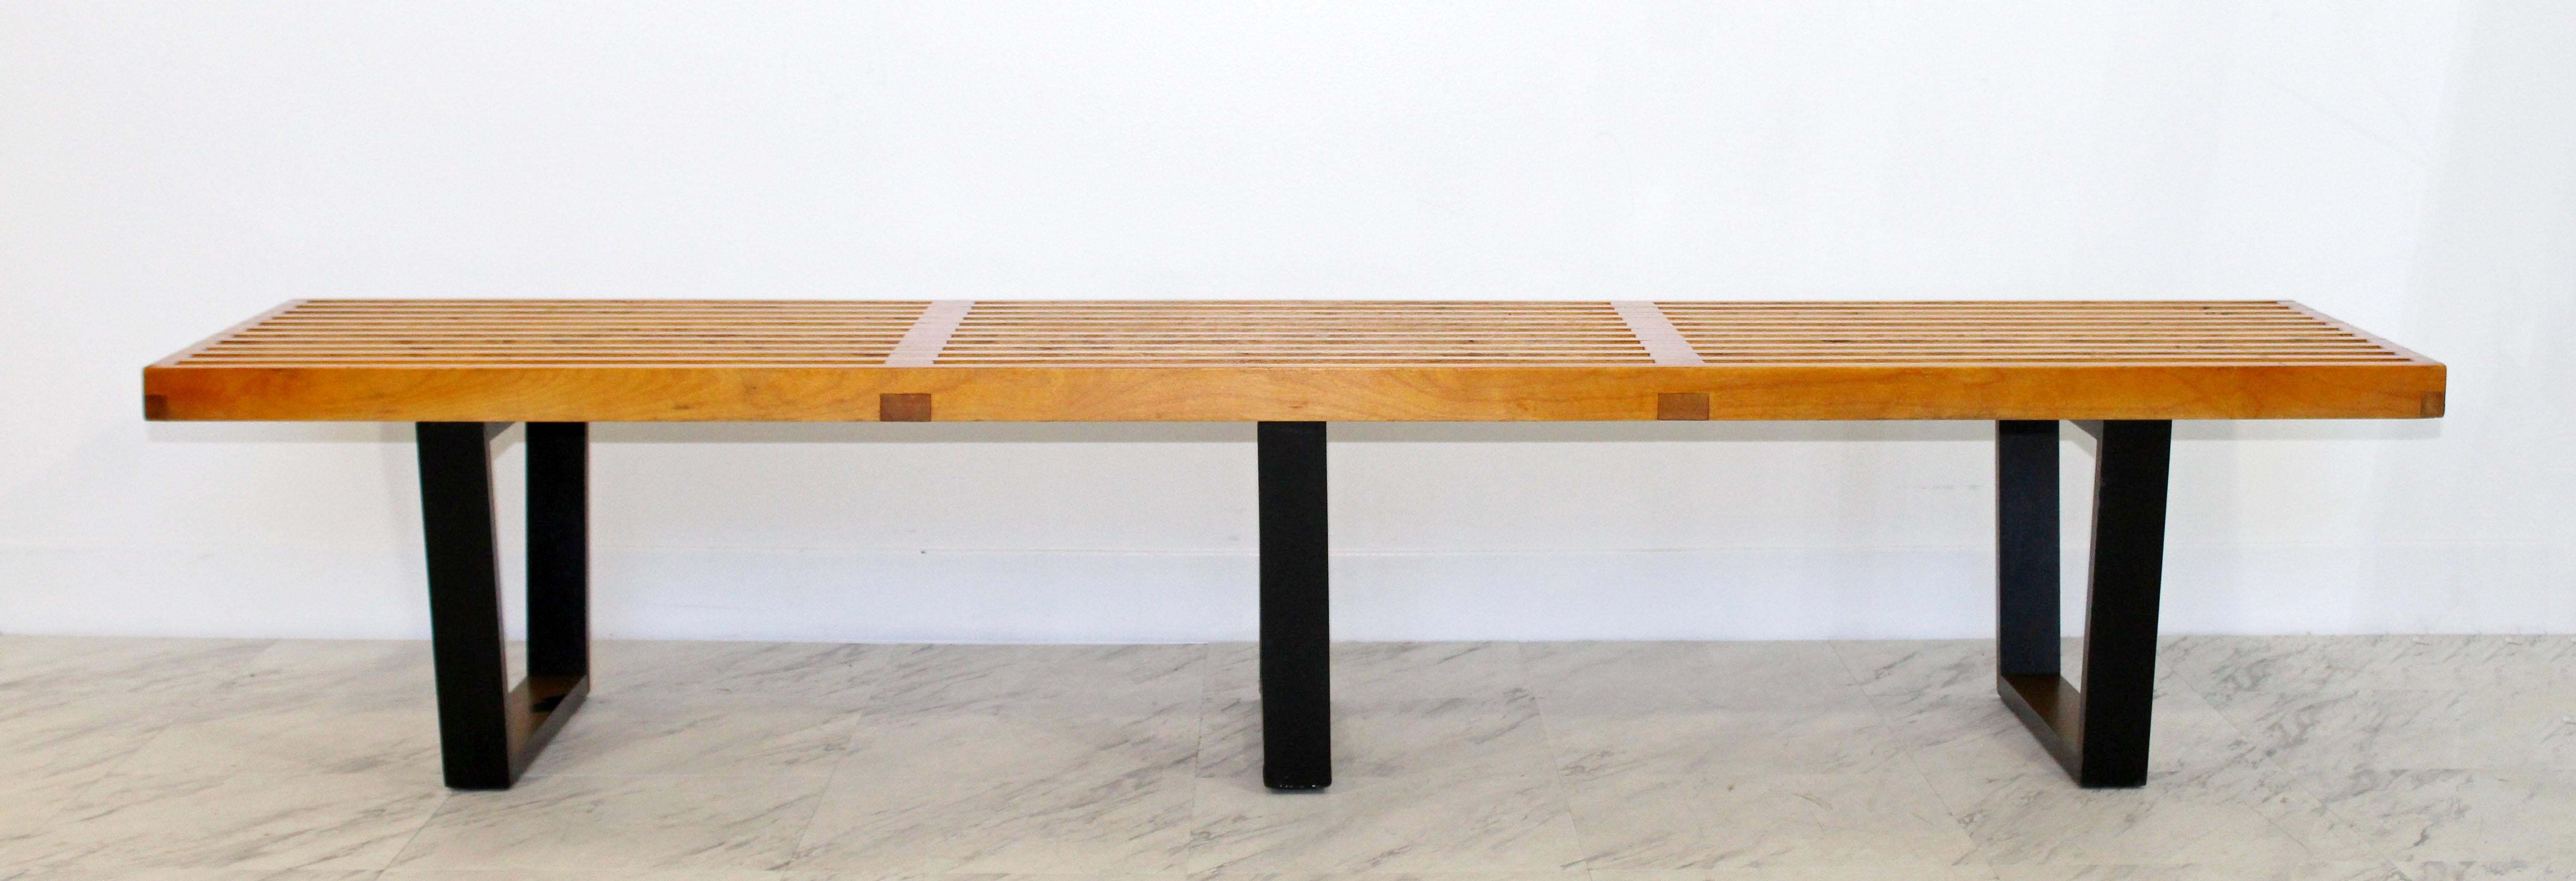 For your consideration is an incredible, original, slat bench, made of maple and black lacquered maple, by George Nelson for Herman Miller, circa the 1950s.This is the original vintage bench. In very good condition. Wear consistent with age and use.